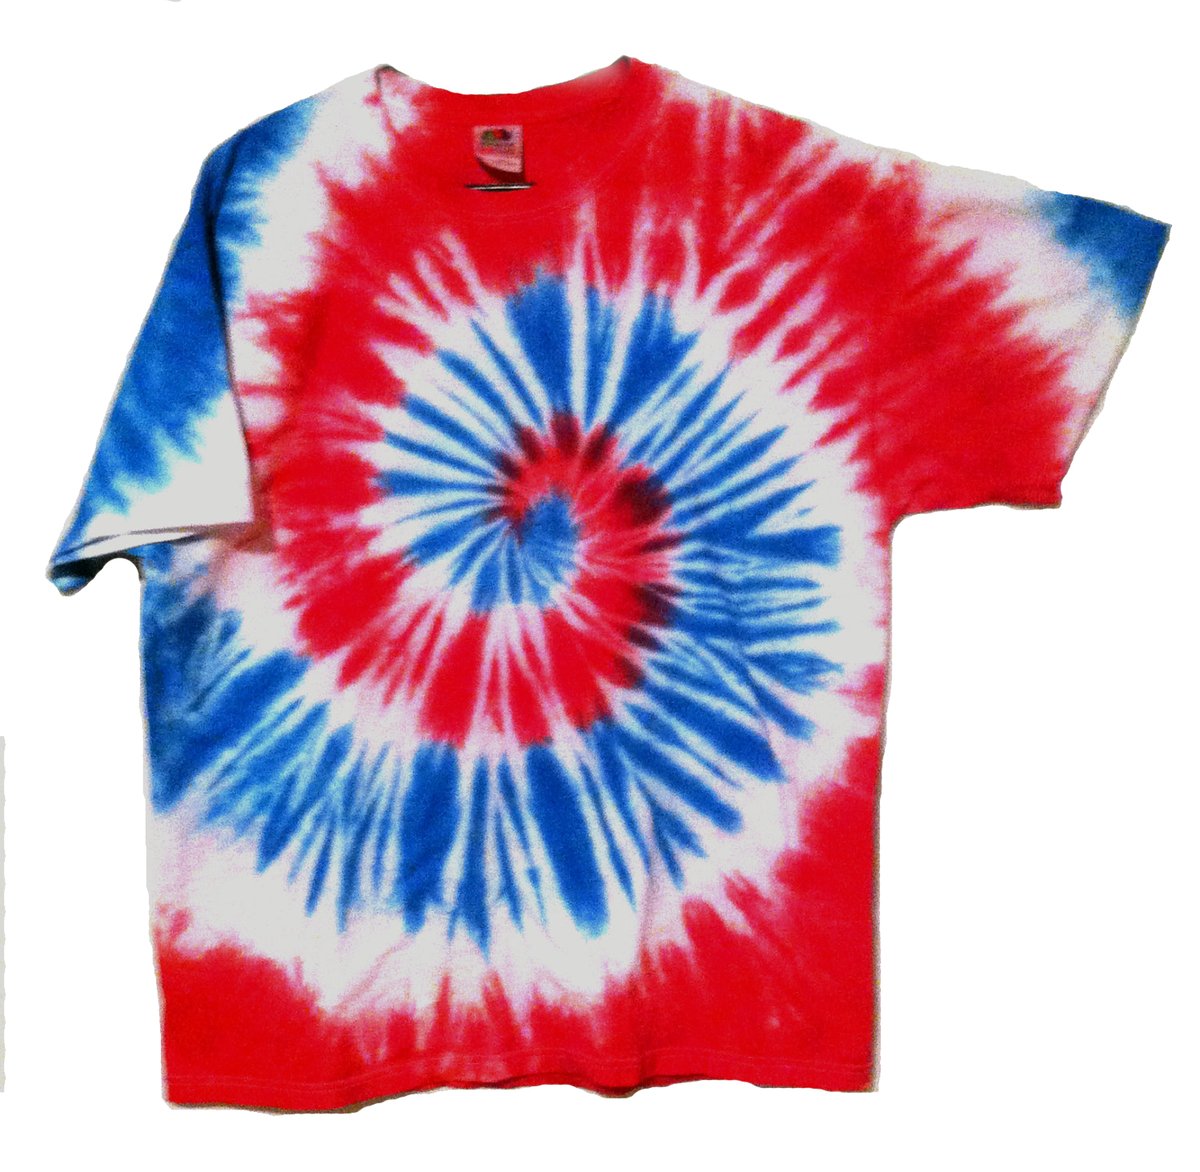 Patriotic Tie Dye Shirt - Red, White, and Blue Spiral - USA Tie Dye For Men  and Women